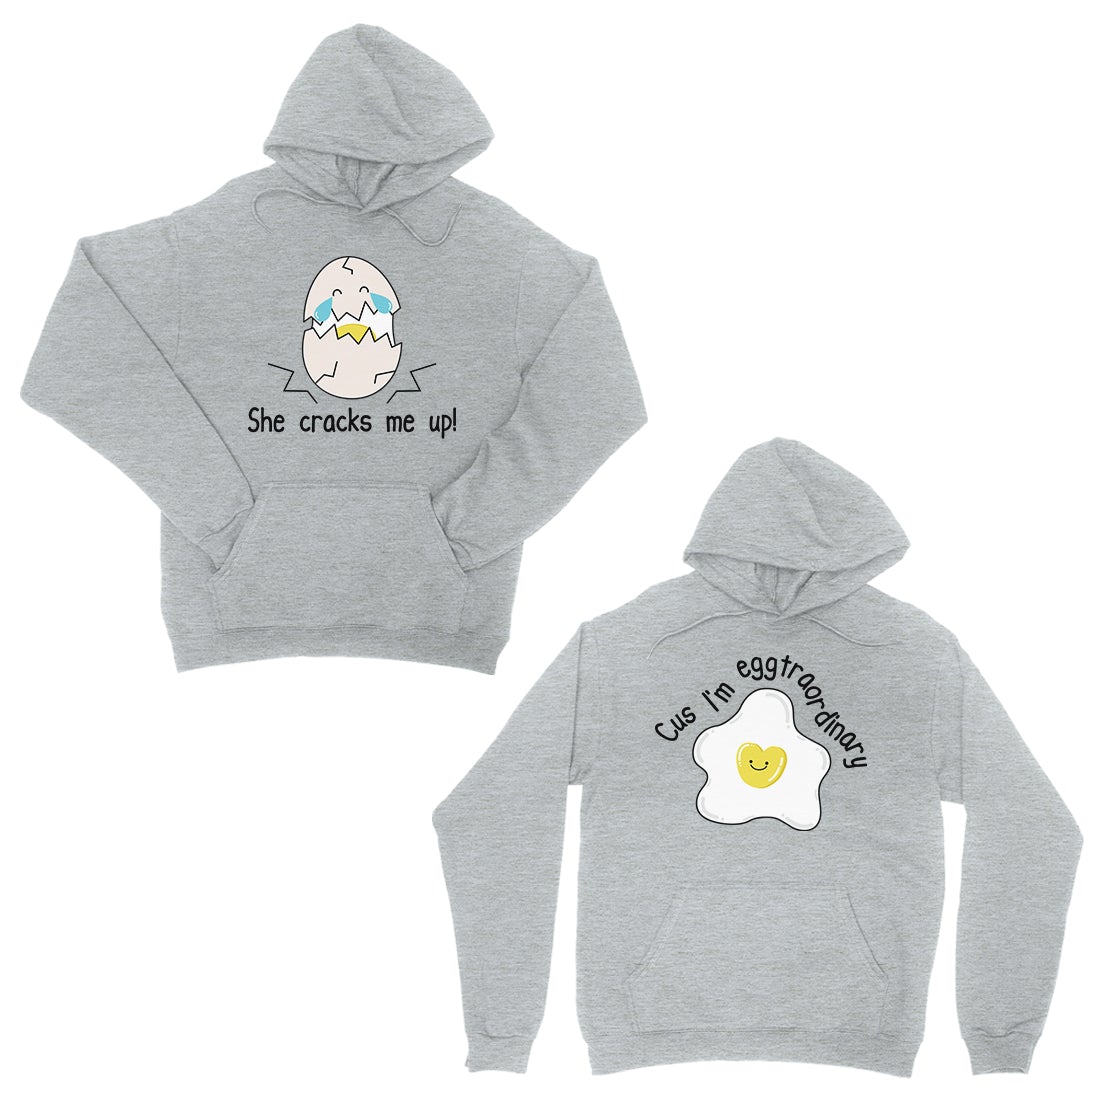 Egg & Eggtraordinary Grey Matching Hoodies For Valentine's Day Gift